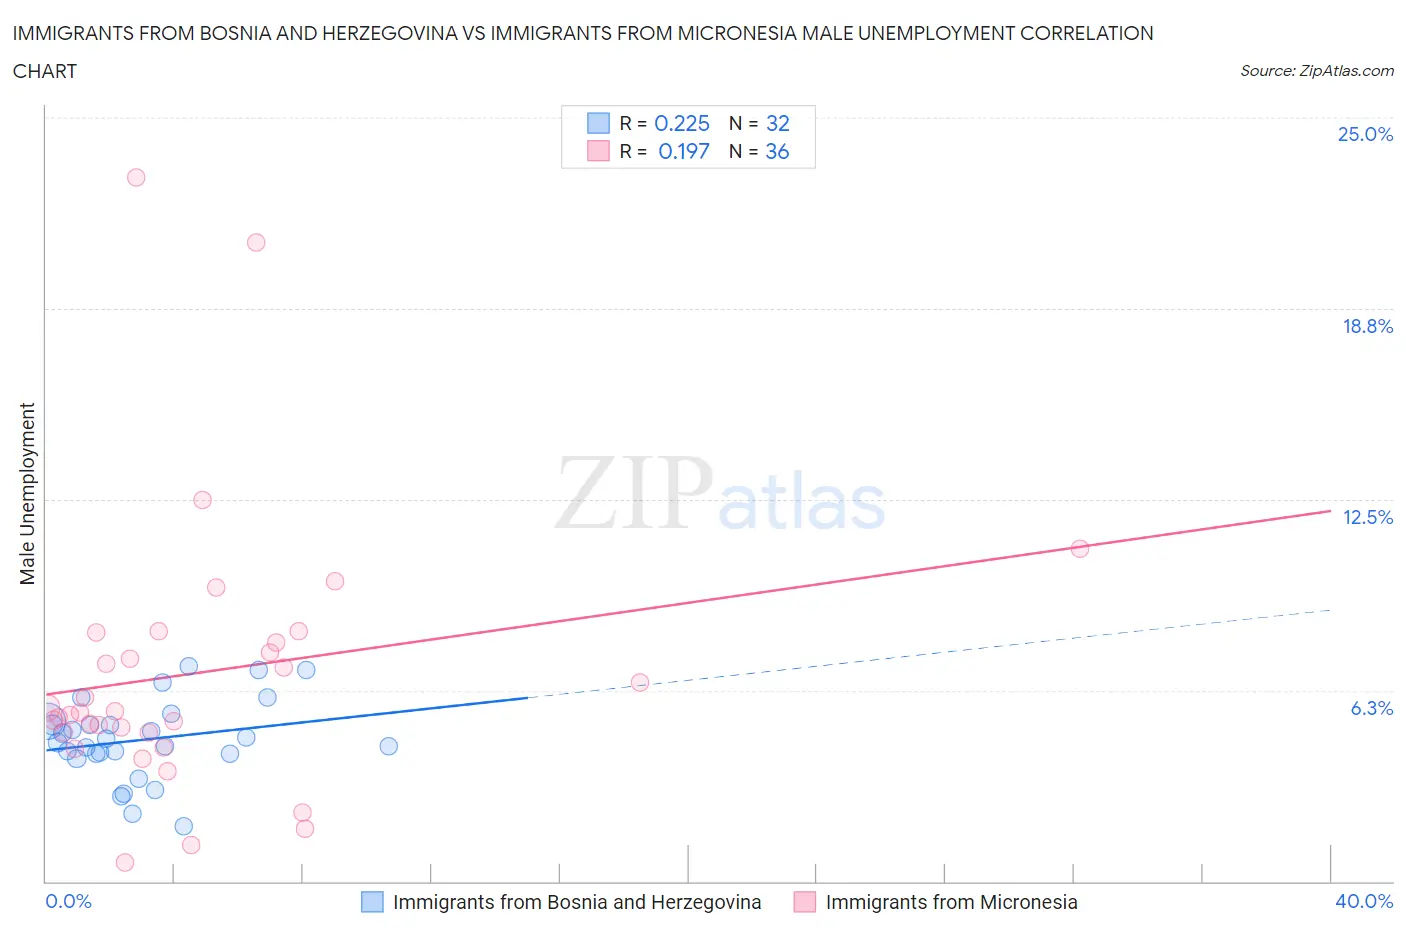 Immigrants from Bosnia and Herzegovina vs Immigrants from Micronesia Male Unemployment